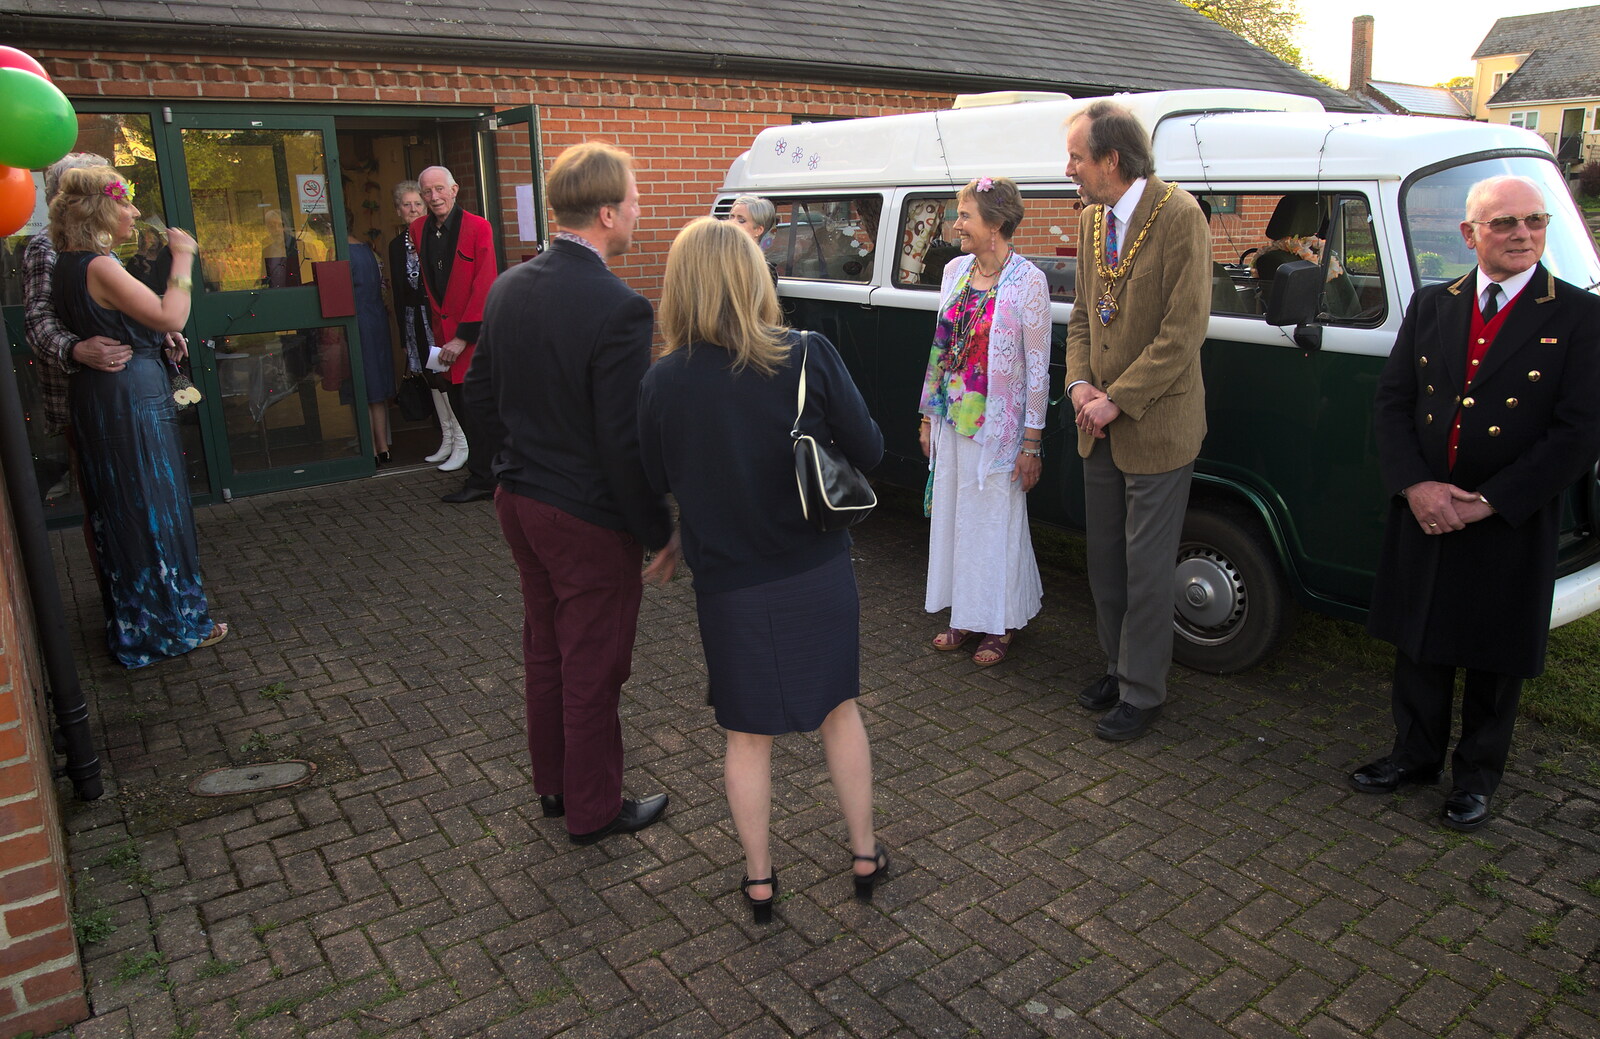 The BBs at the Mayor's Charity Ball, Town Moors, Eye, Suffolk - 4th May 2013: Merlin in front of his camper van